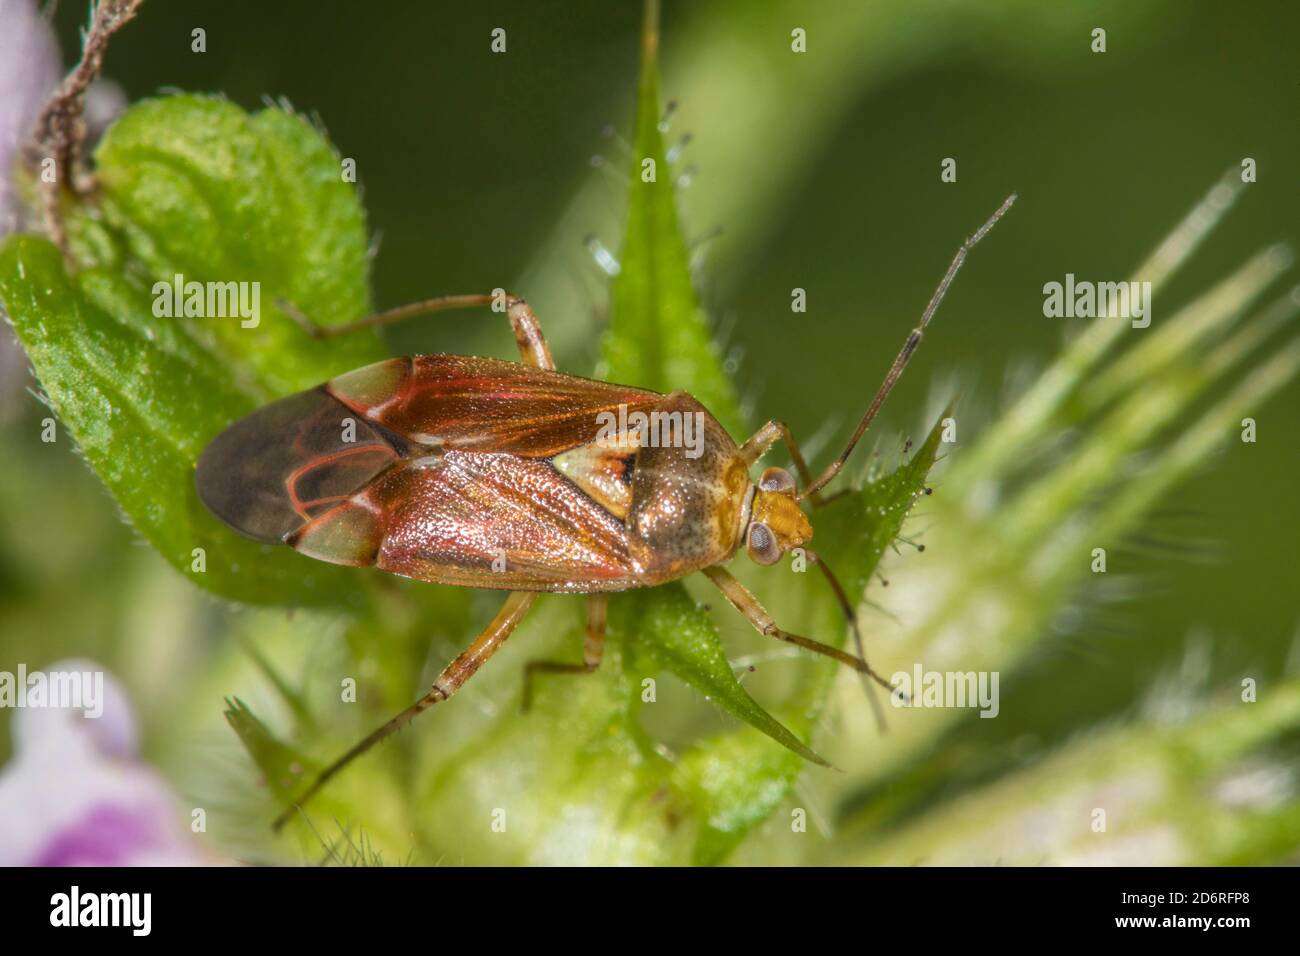 Capsid bugs (Actinonotus pulcher), sits on a leaf, Germany Stock Photo